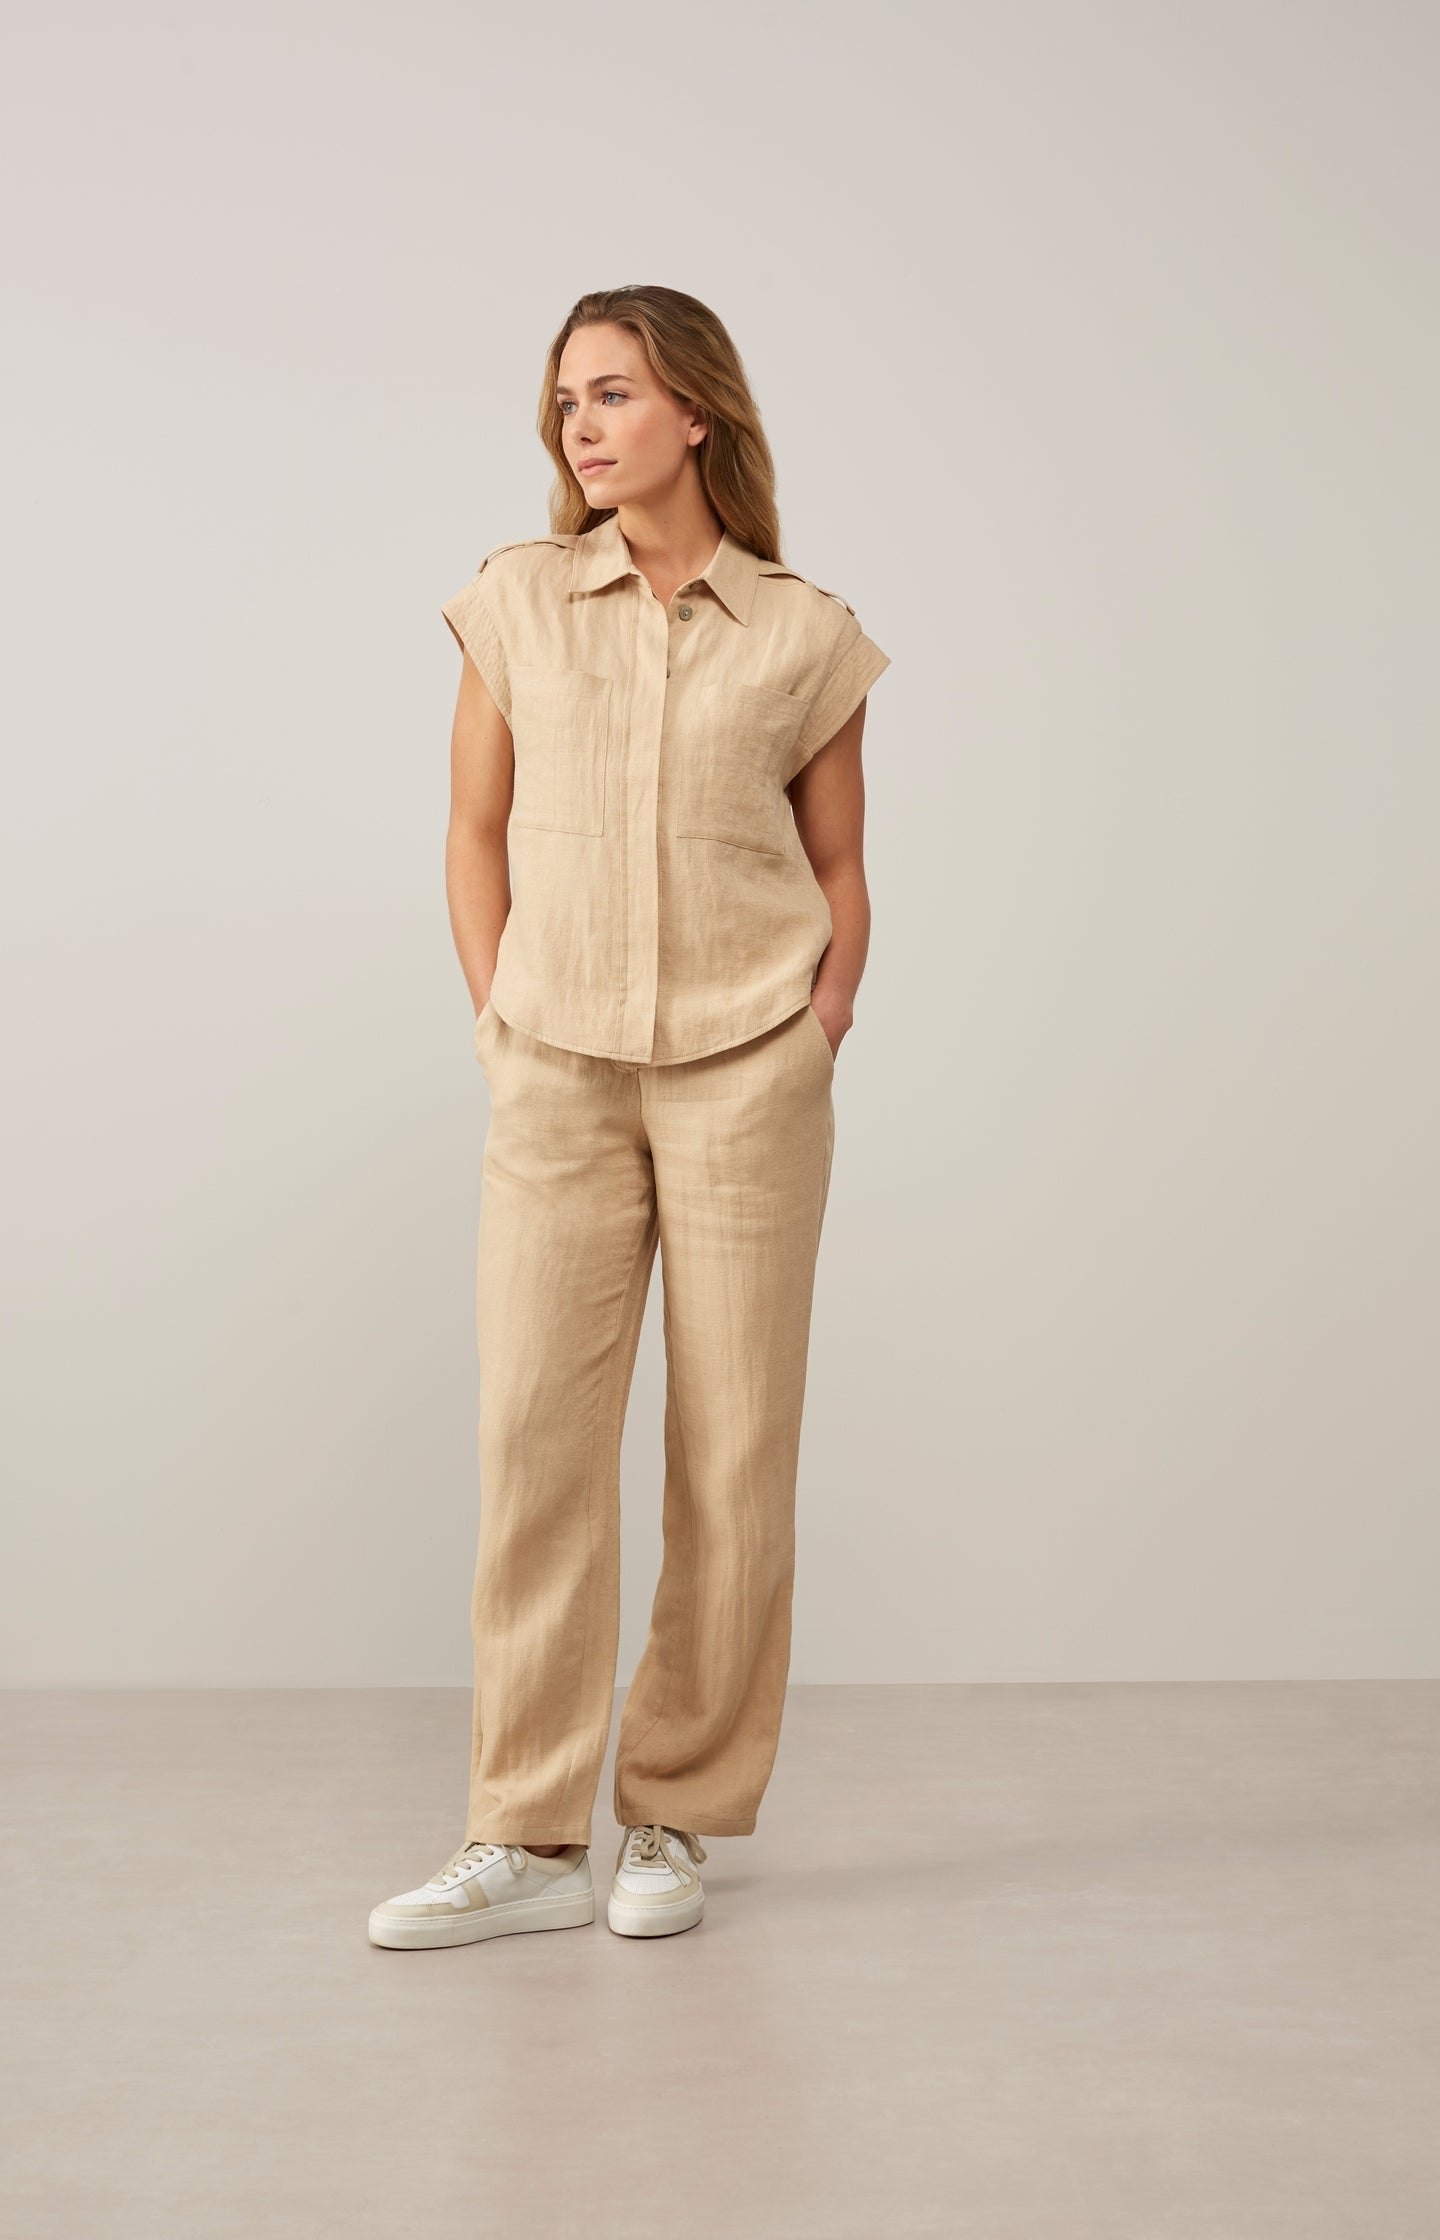 Trousers with buttons, side pockets and elastic waist - Type: lookbook